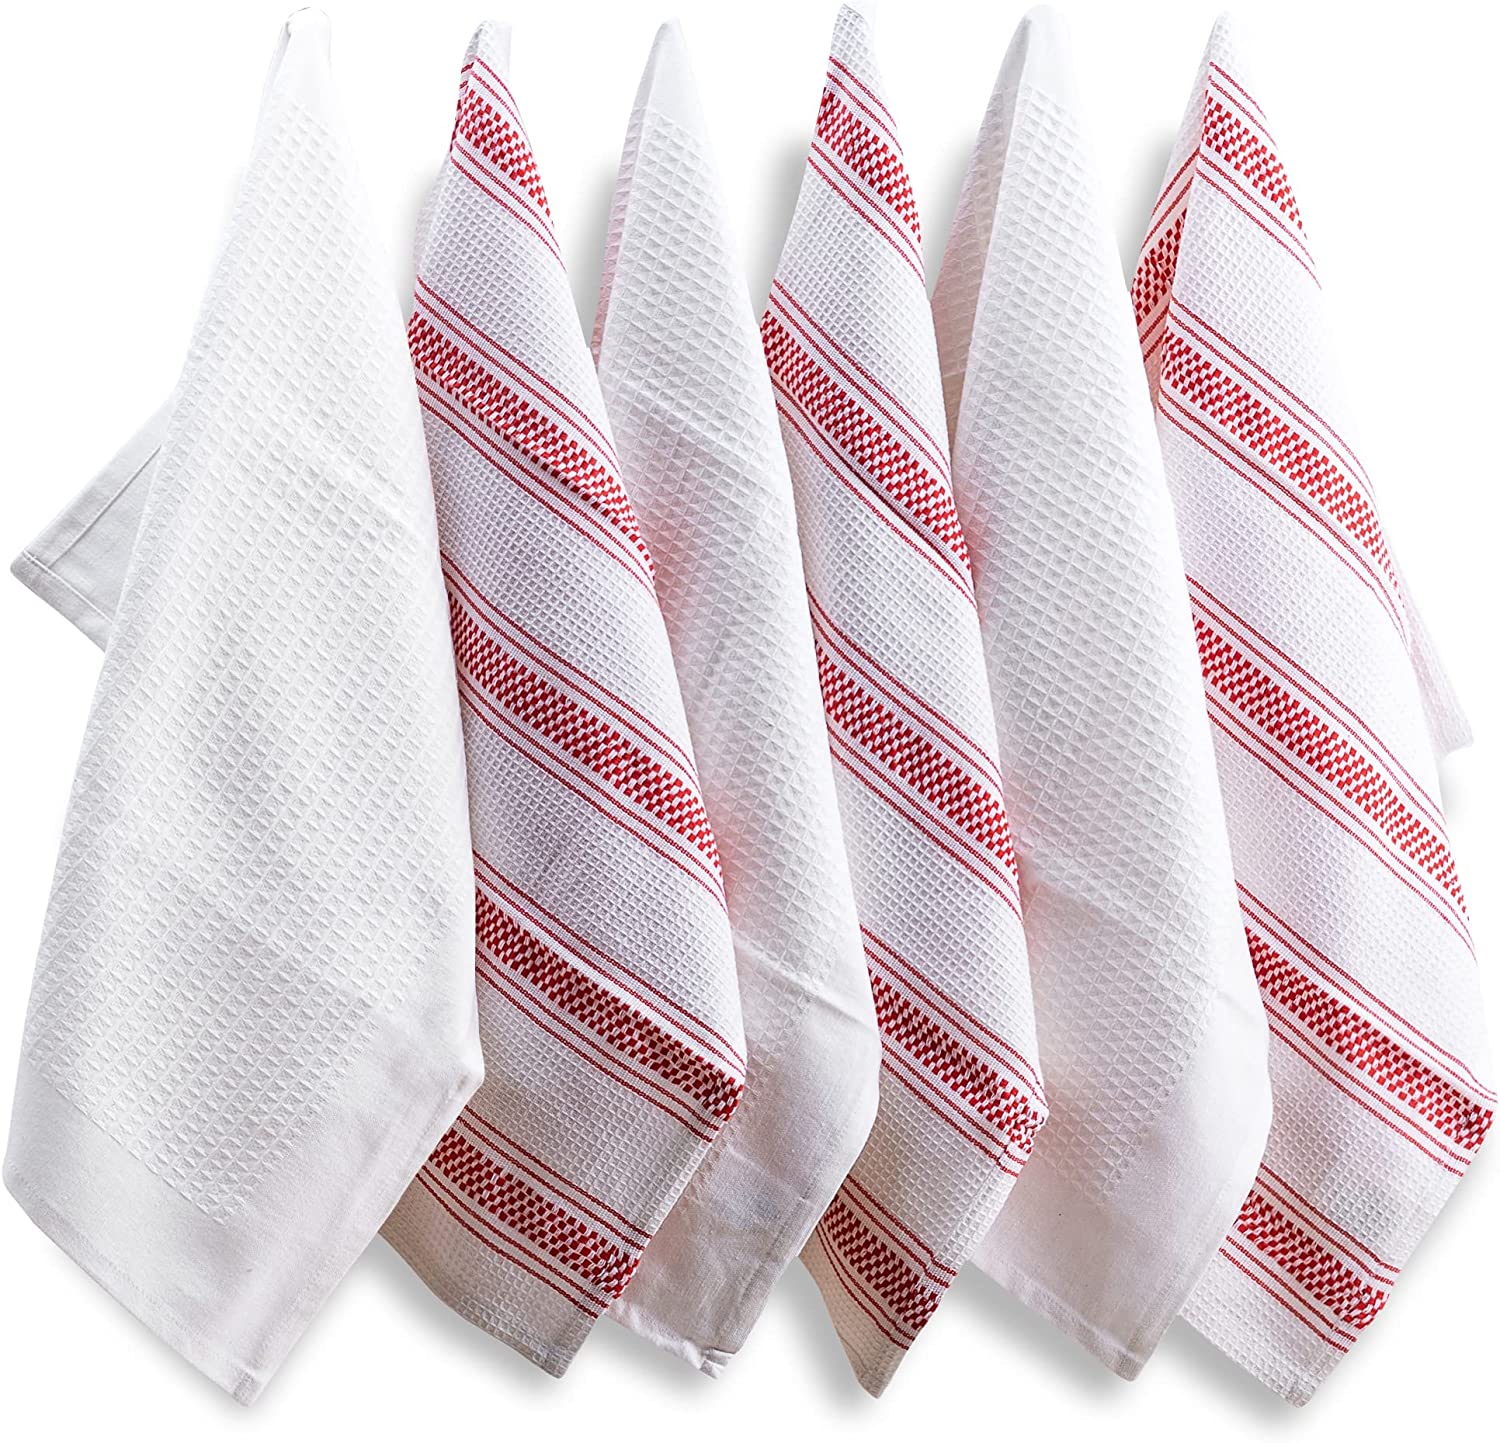 white kitchen towels, farmhouse kitchen towels, red cotton kitchen towels are best hand towels.